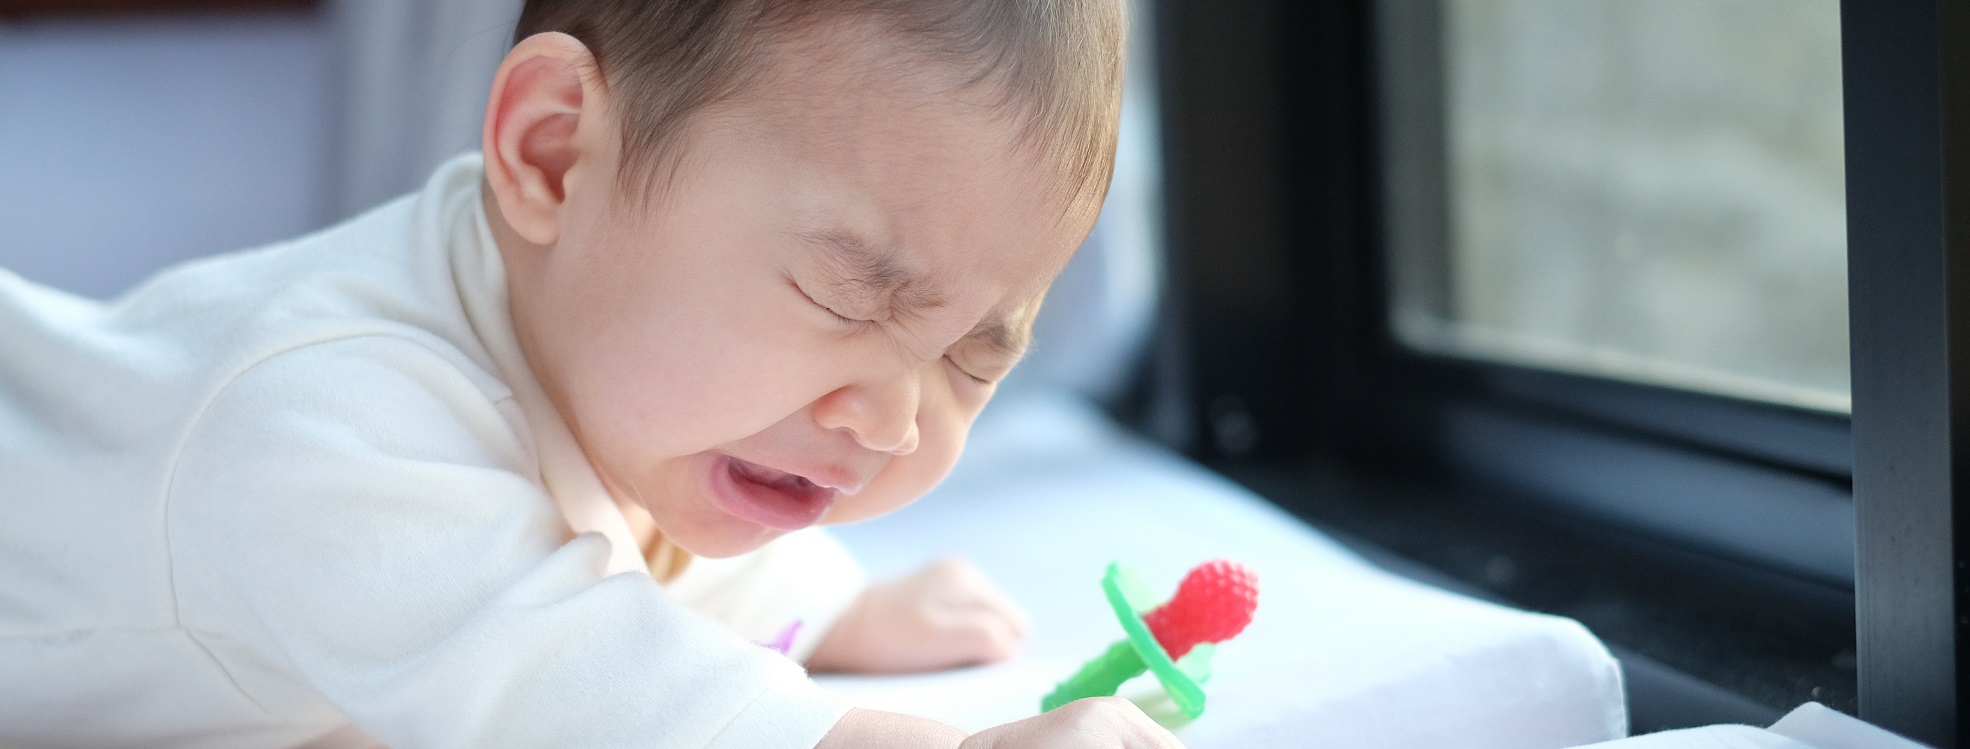 Infant Congestion Why Do Newborns Sneeze So Much